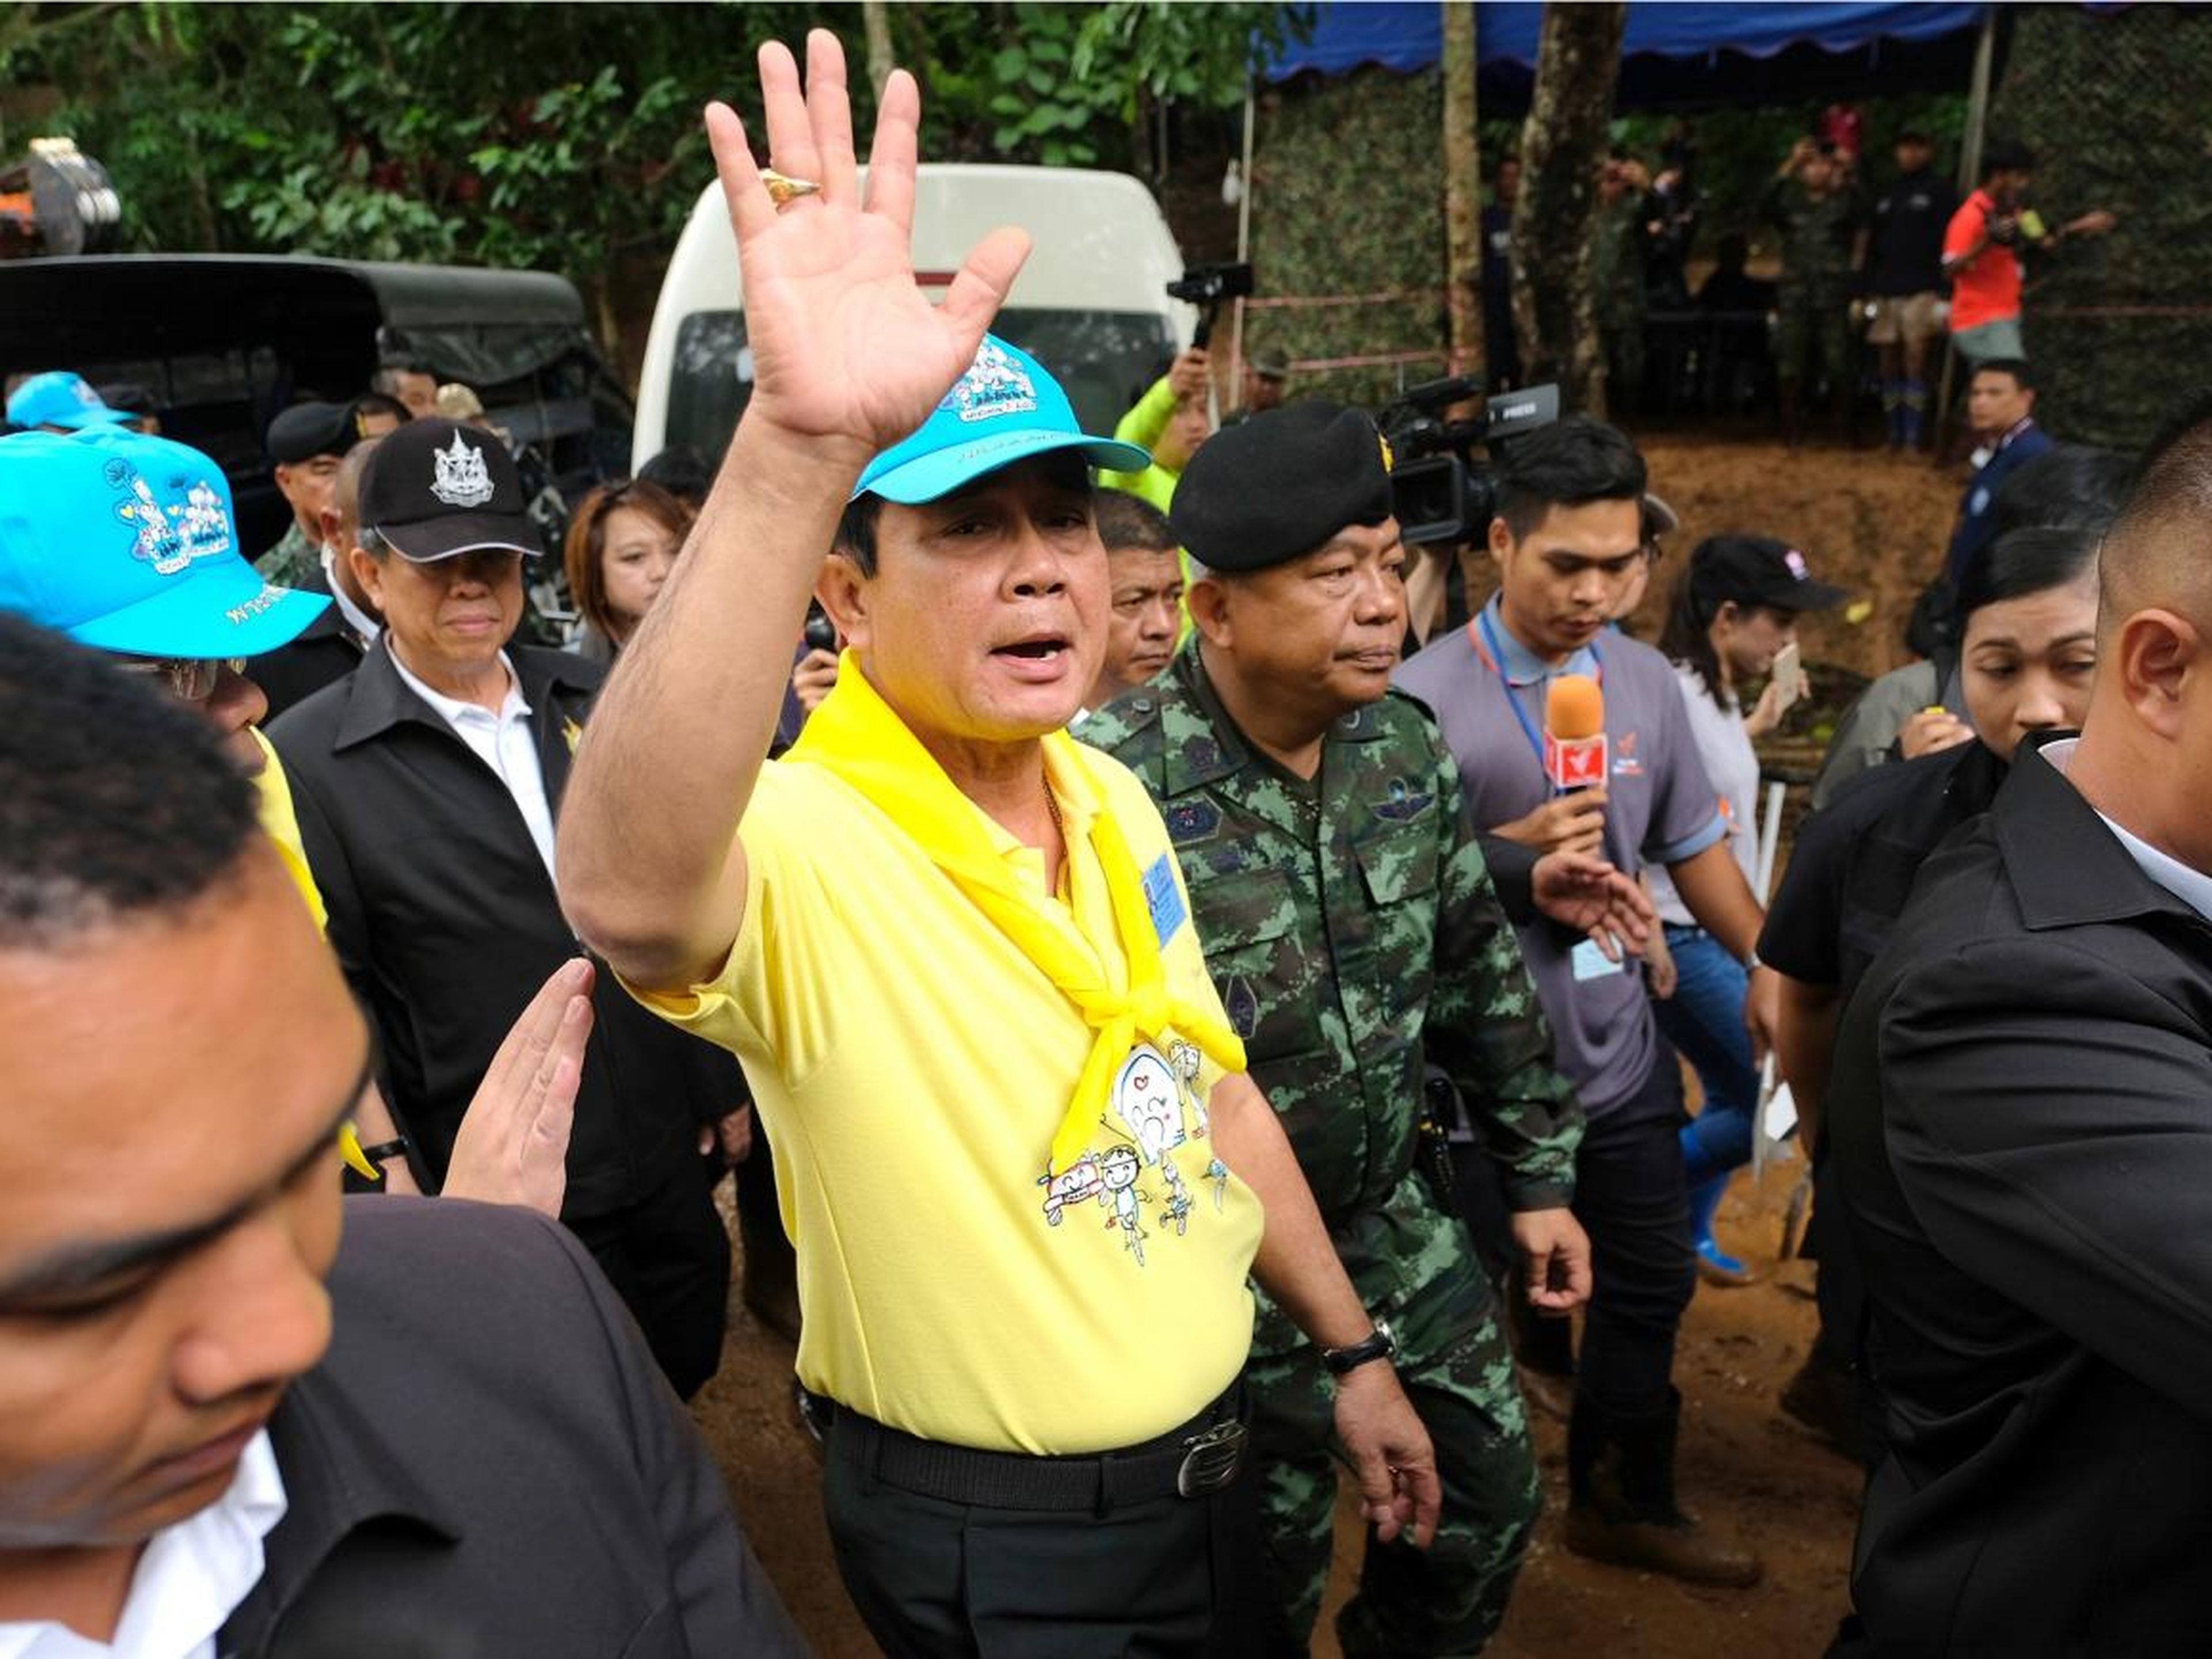 Thai Prime Minister Prayut Chan-O-Cha at the Tham Luang cave complex in Chiang Rai, Thailand, in June 2018.